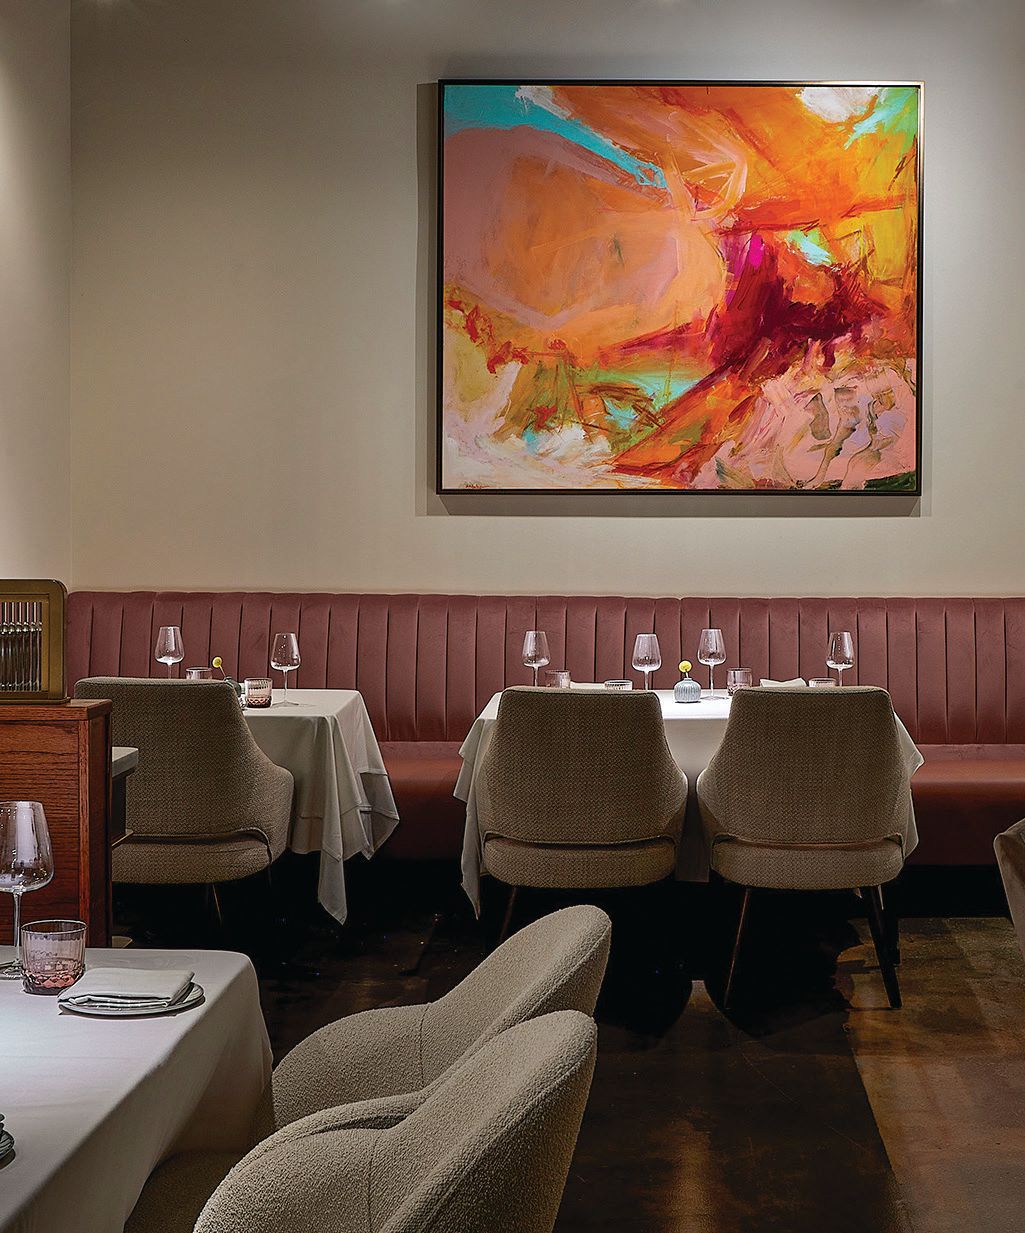 Designed by chef Sujan Sarkar himself, Indienne’s interiors feature soothing tones and colorful artwork inspired by the Indian festival of Holi by Chicago-based Ken Andjulis. PHOTO BY NEIL BURGER